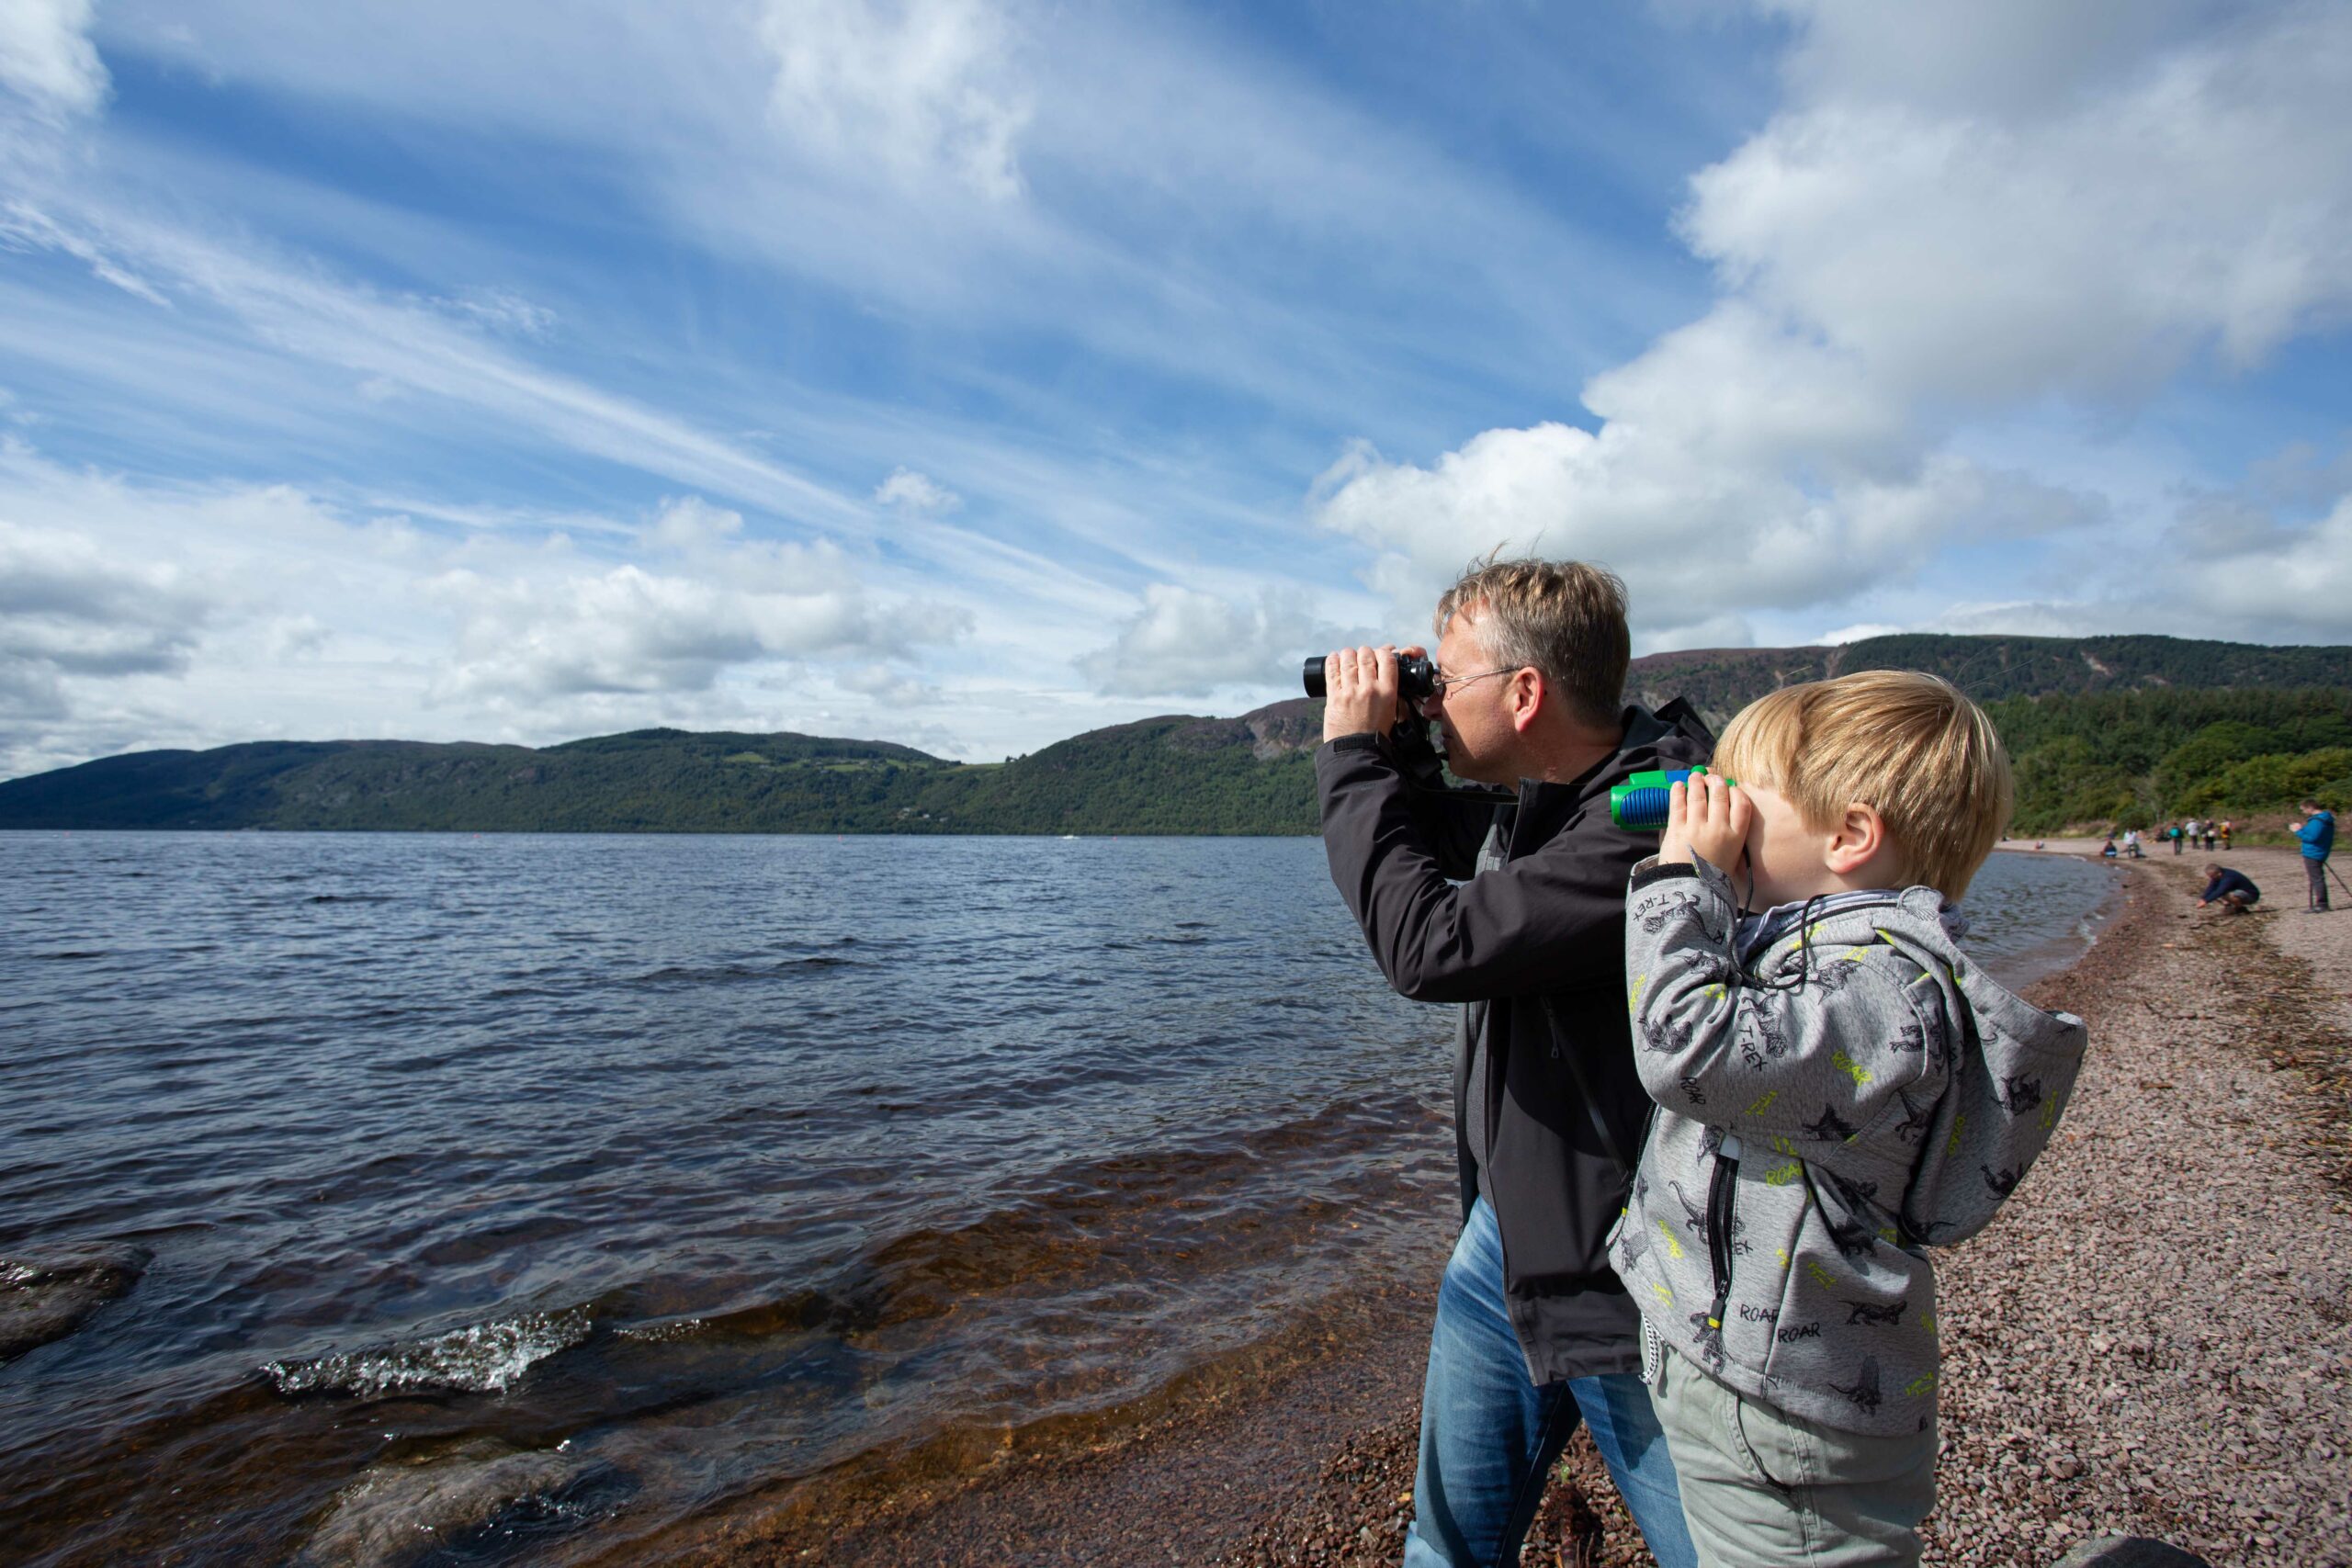 Searching for Nessie during the quest weekend with Loch Ness Exploration and The Loch Ness Centre